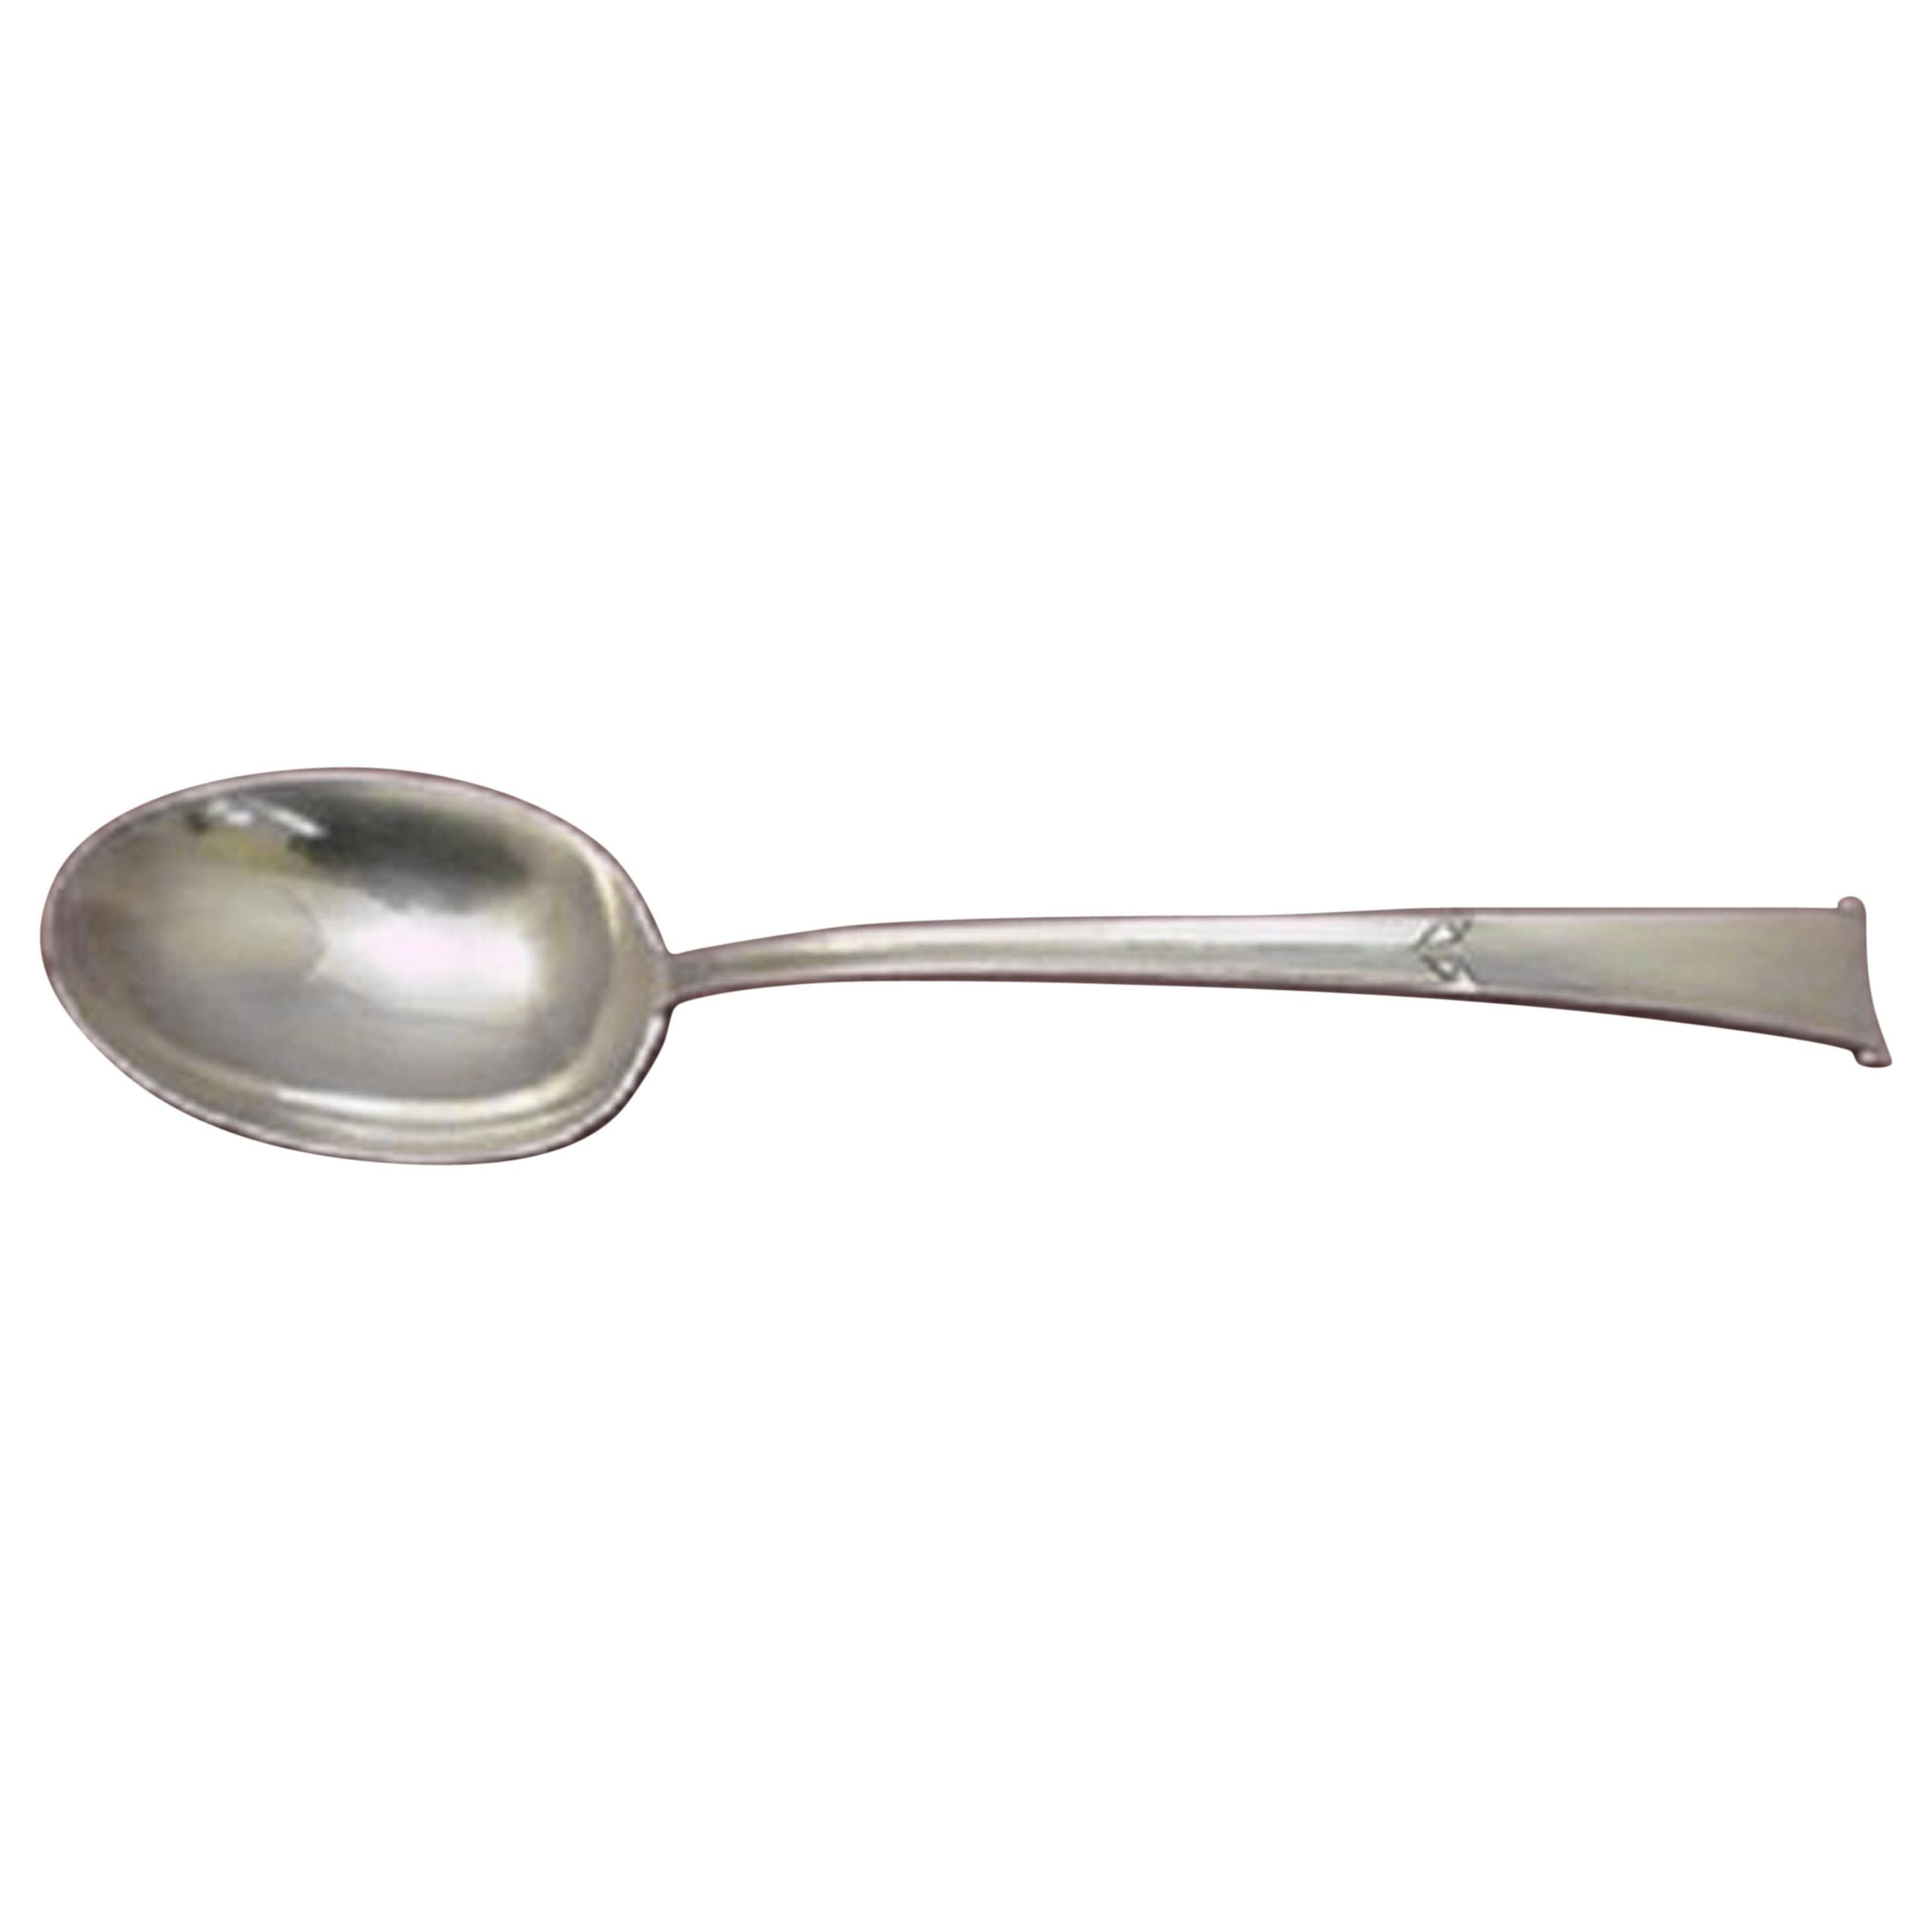 Linenfold by Tiffany & Co. Vegetable Serving Spoon Rare Tiffany Steel Sample